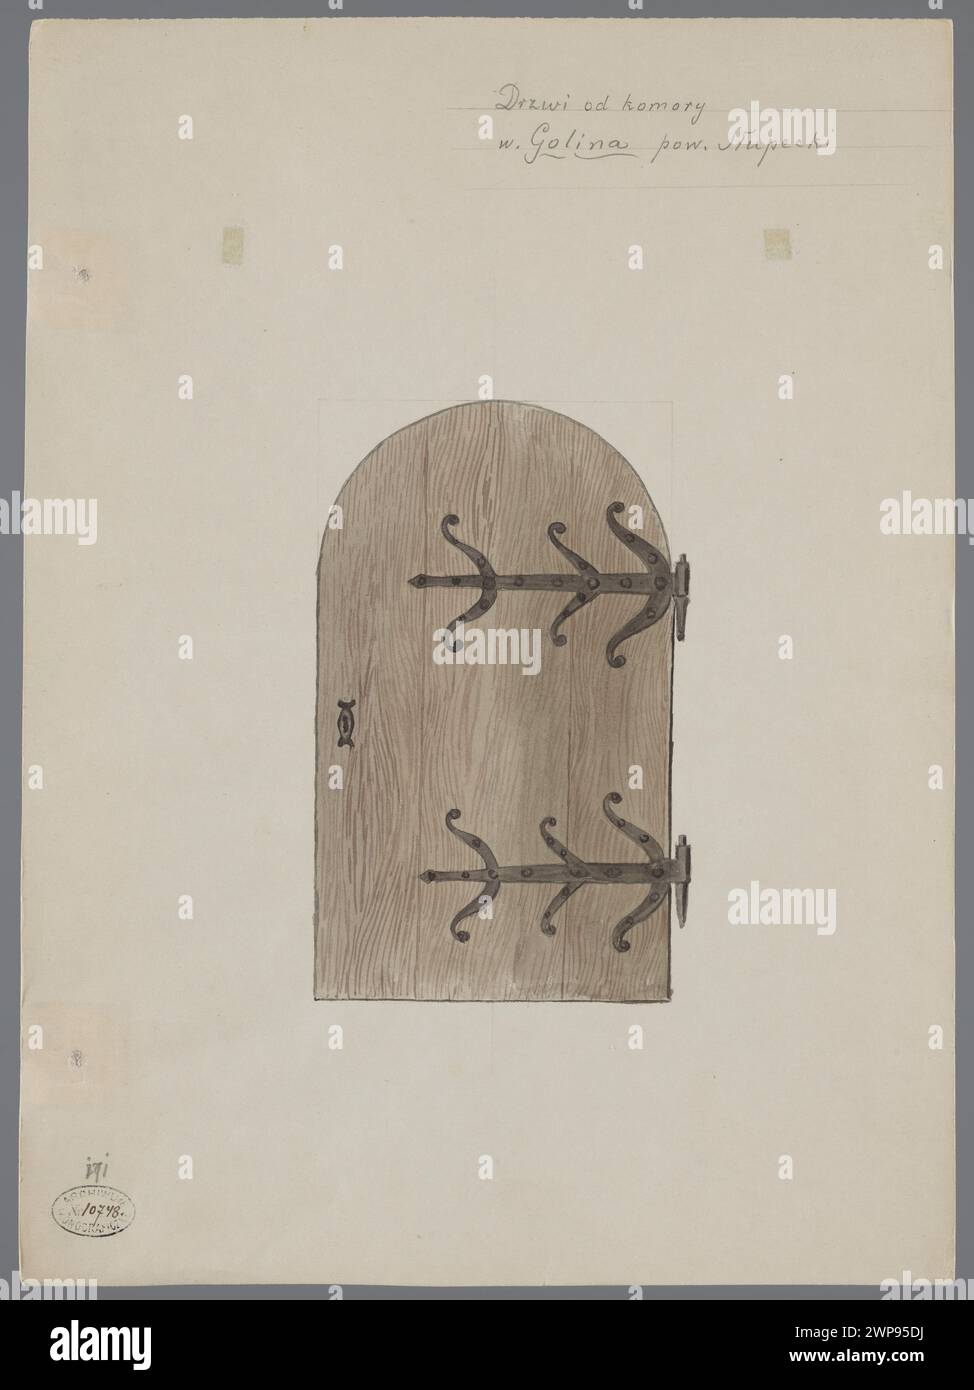 Chamber door in the village of Golina; Pretty, Szymon (Ca 1864-1942); 1918 (not after 30.01.1918) (1918-00-00-1918-00-00); Stock Photo